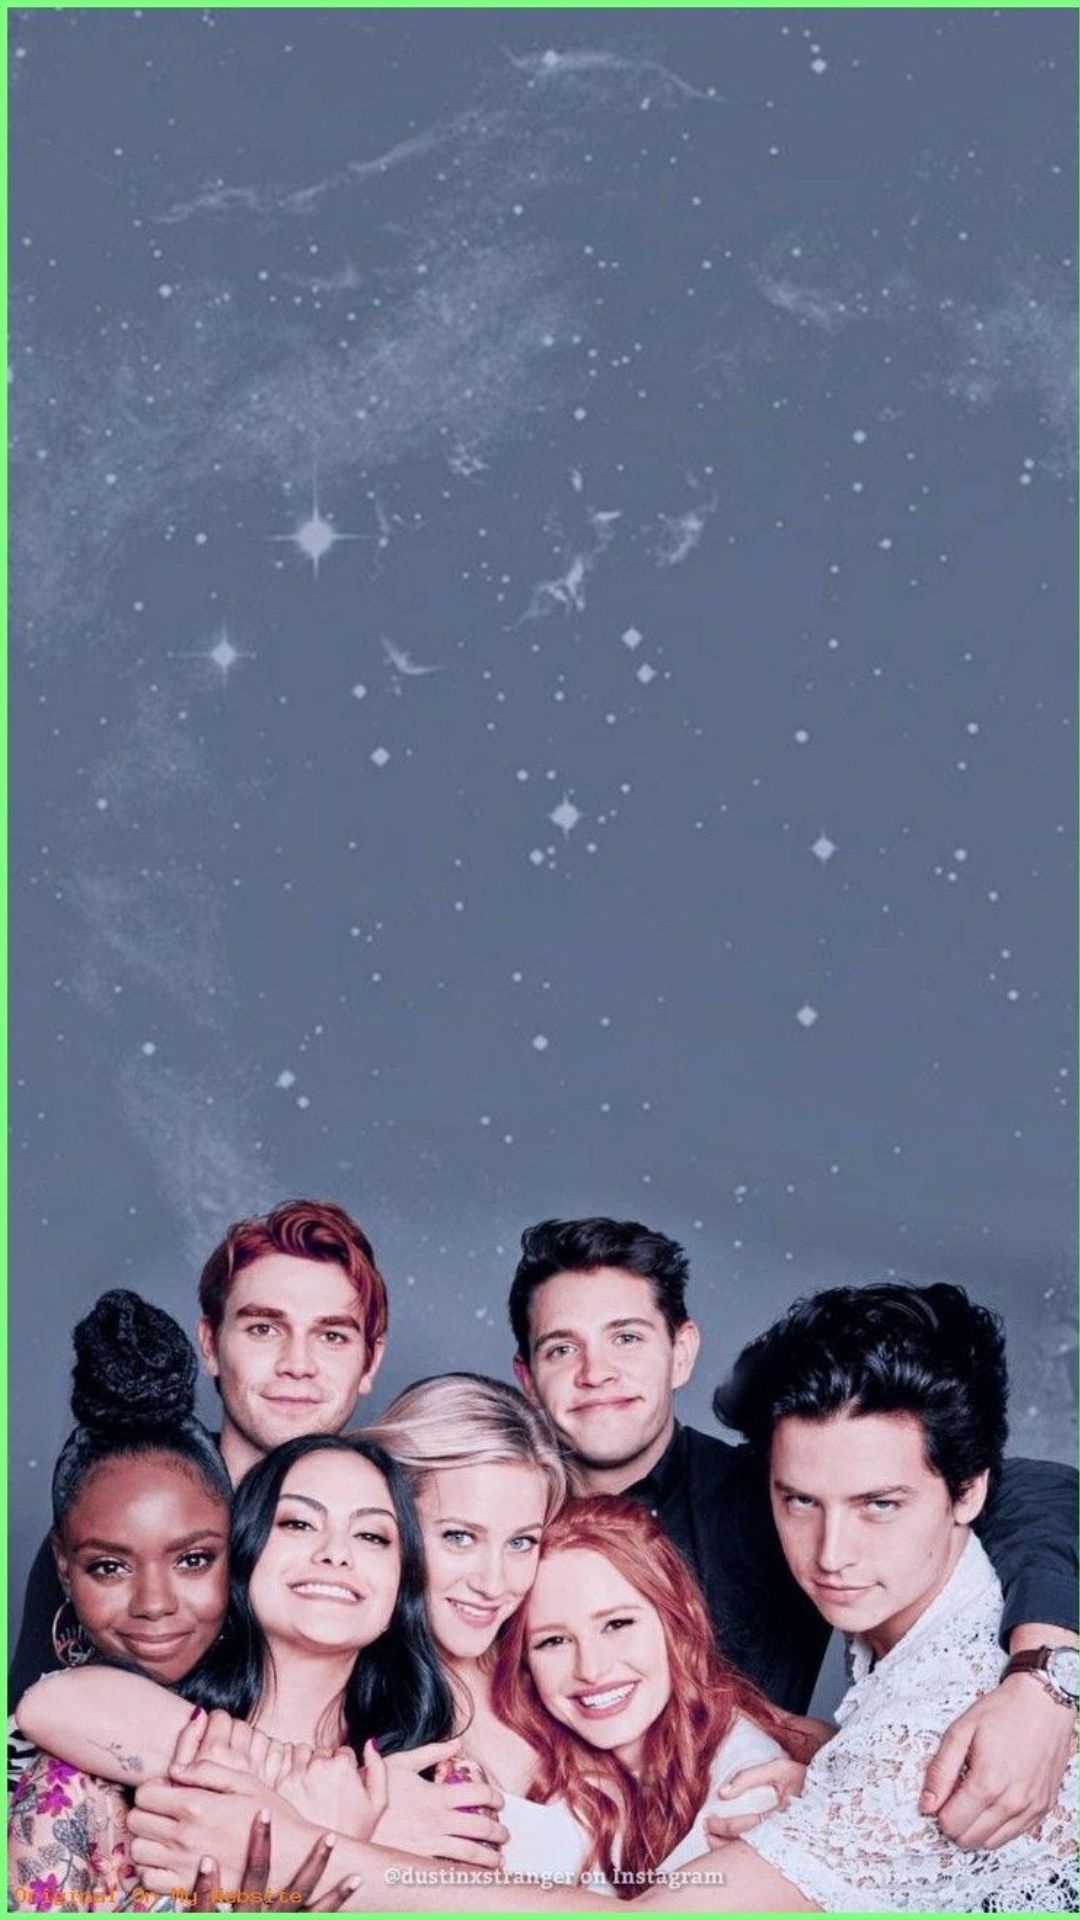 Riverdale cast wallpaper for phone and desktop backgrounds! I made this for my phone and I love it so much! - Riverdale